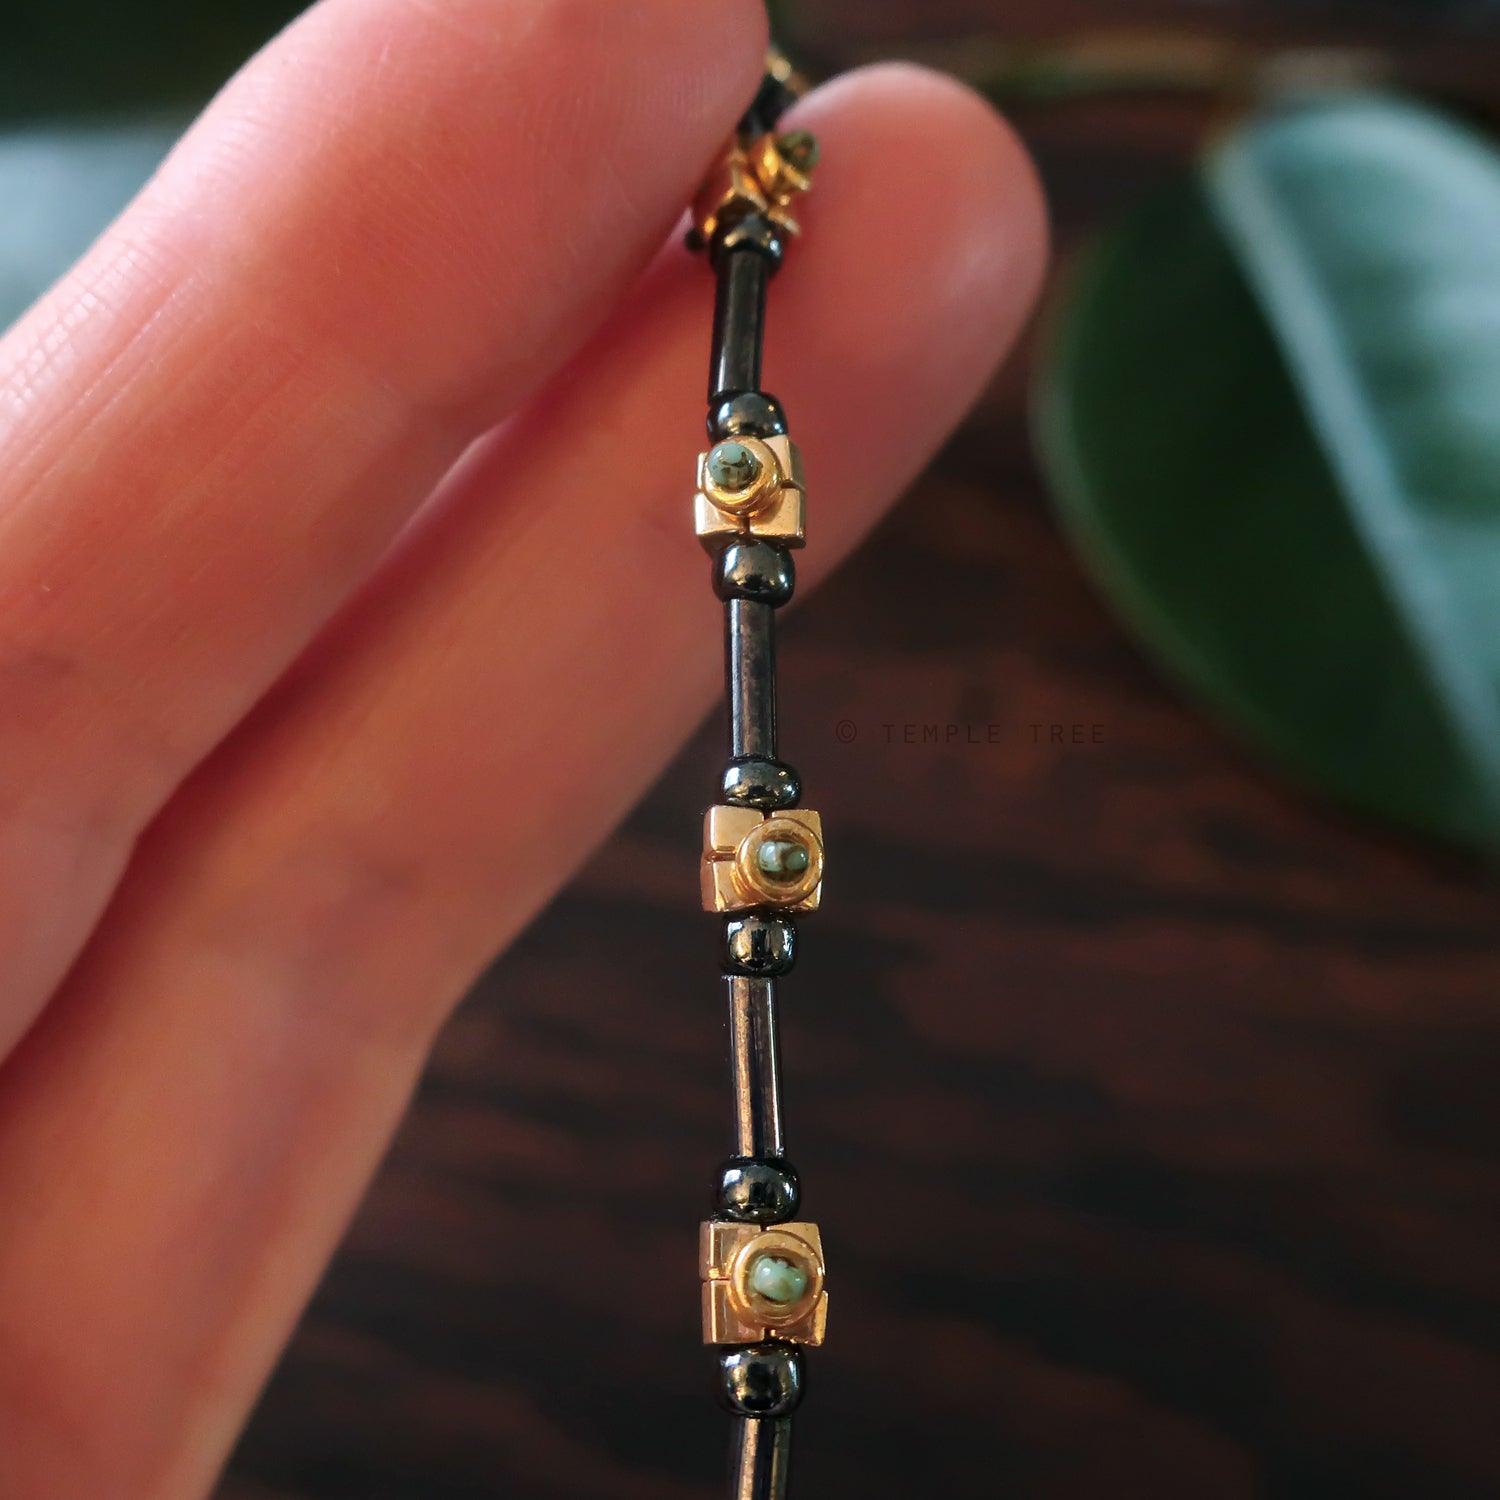 Temple Tree Lost Circuitry Beadwoven Bracelet v1 - Grey, Gold and Faux Turquoise